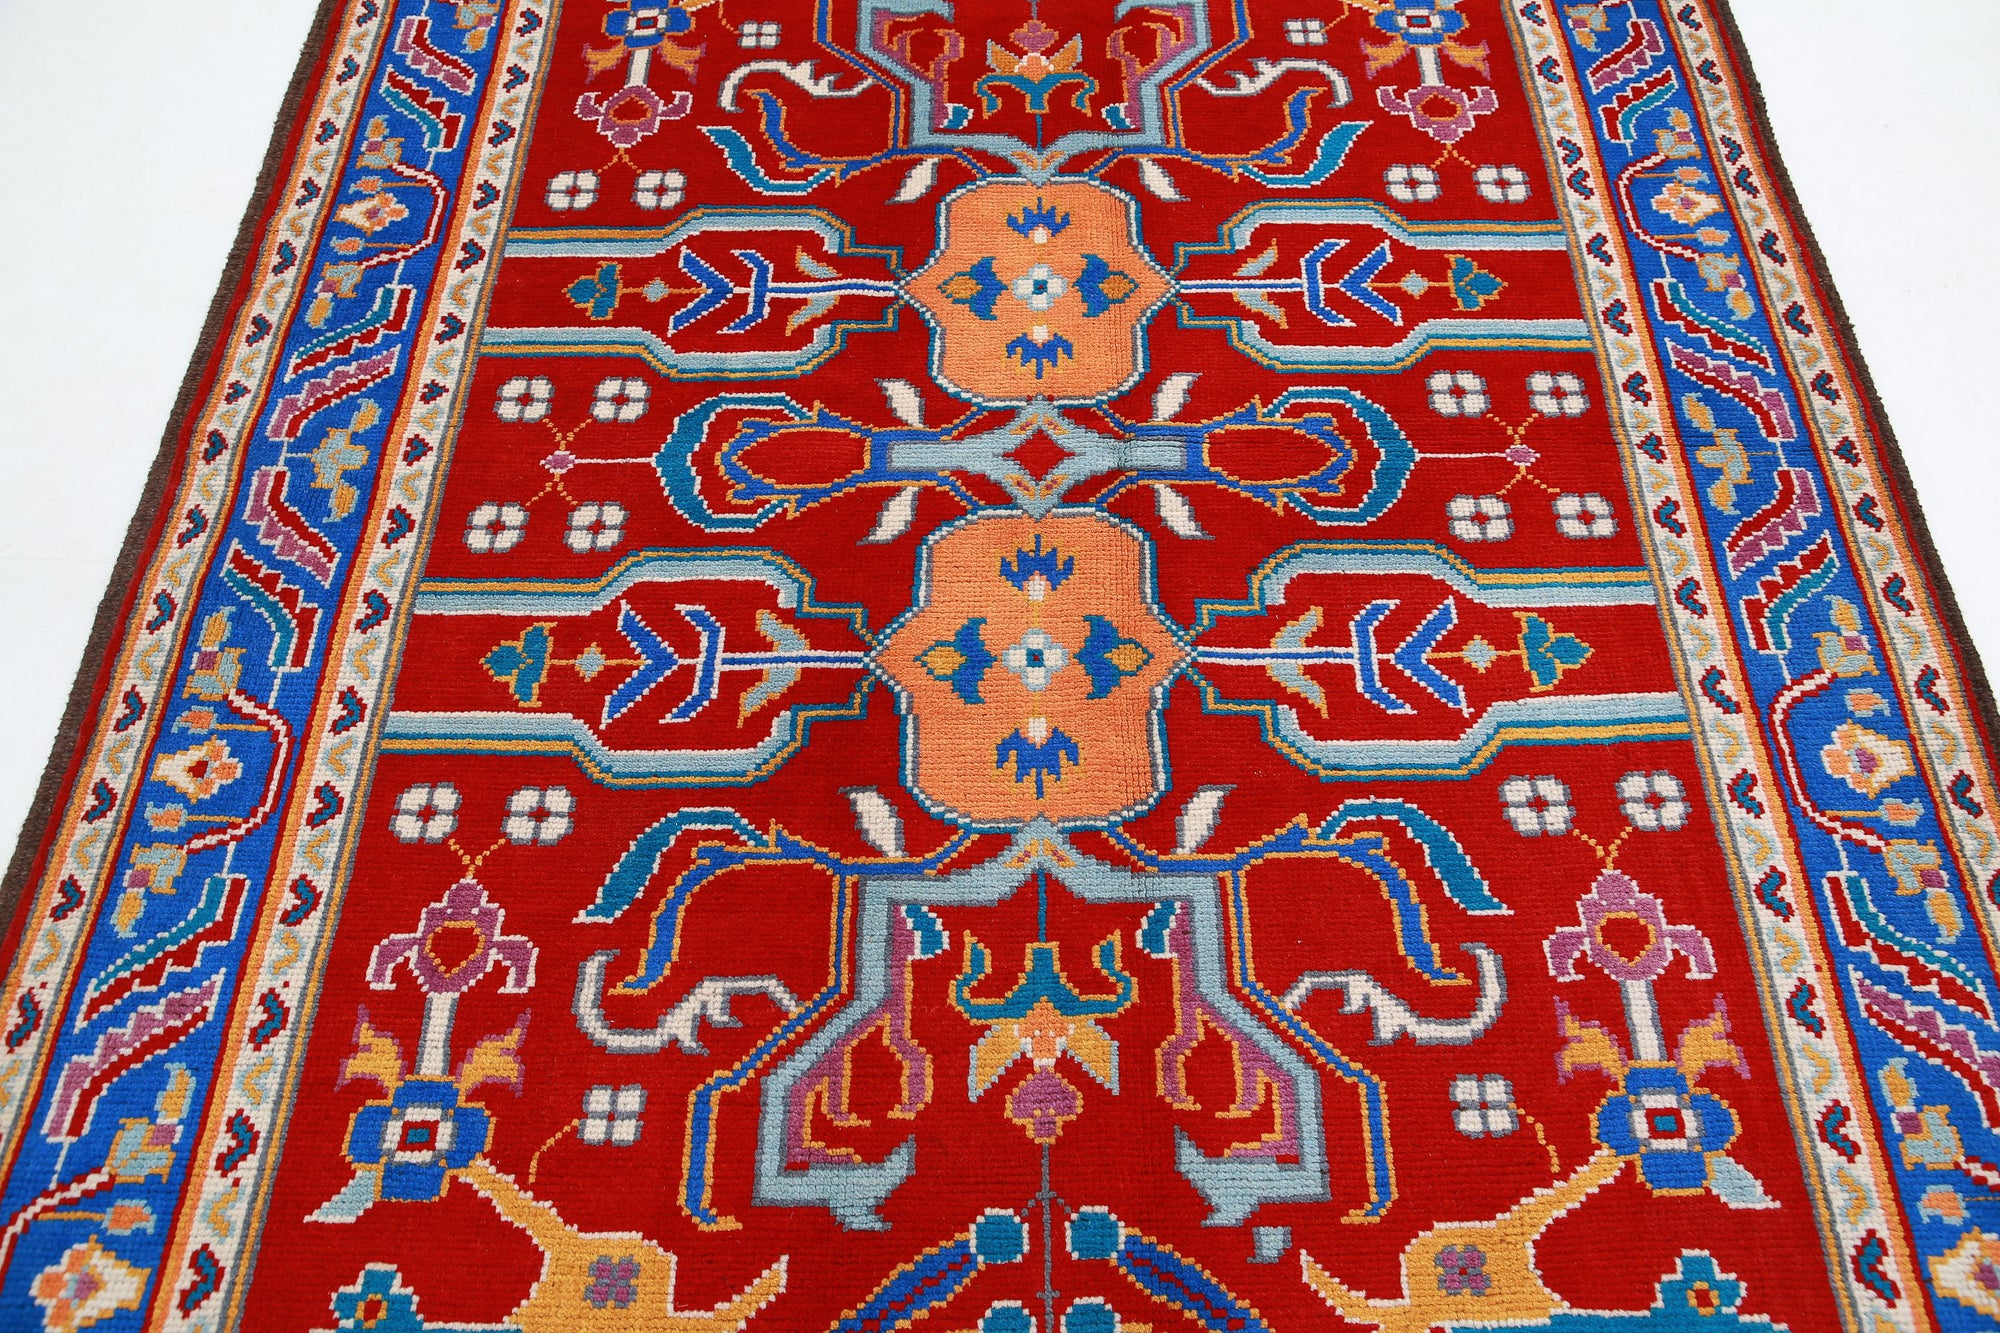 Revival-hand-knotted-qarghani-wool-rug-5014220-4.jpg